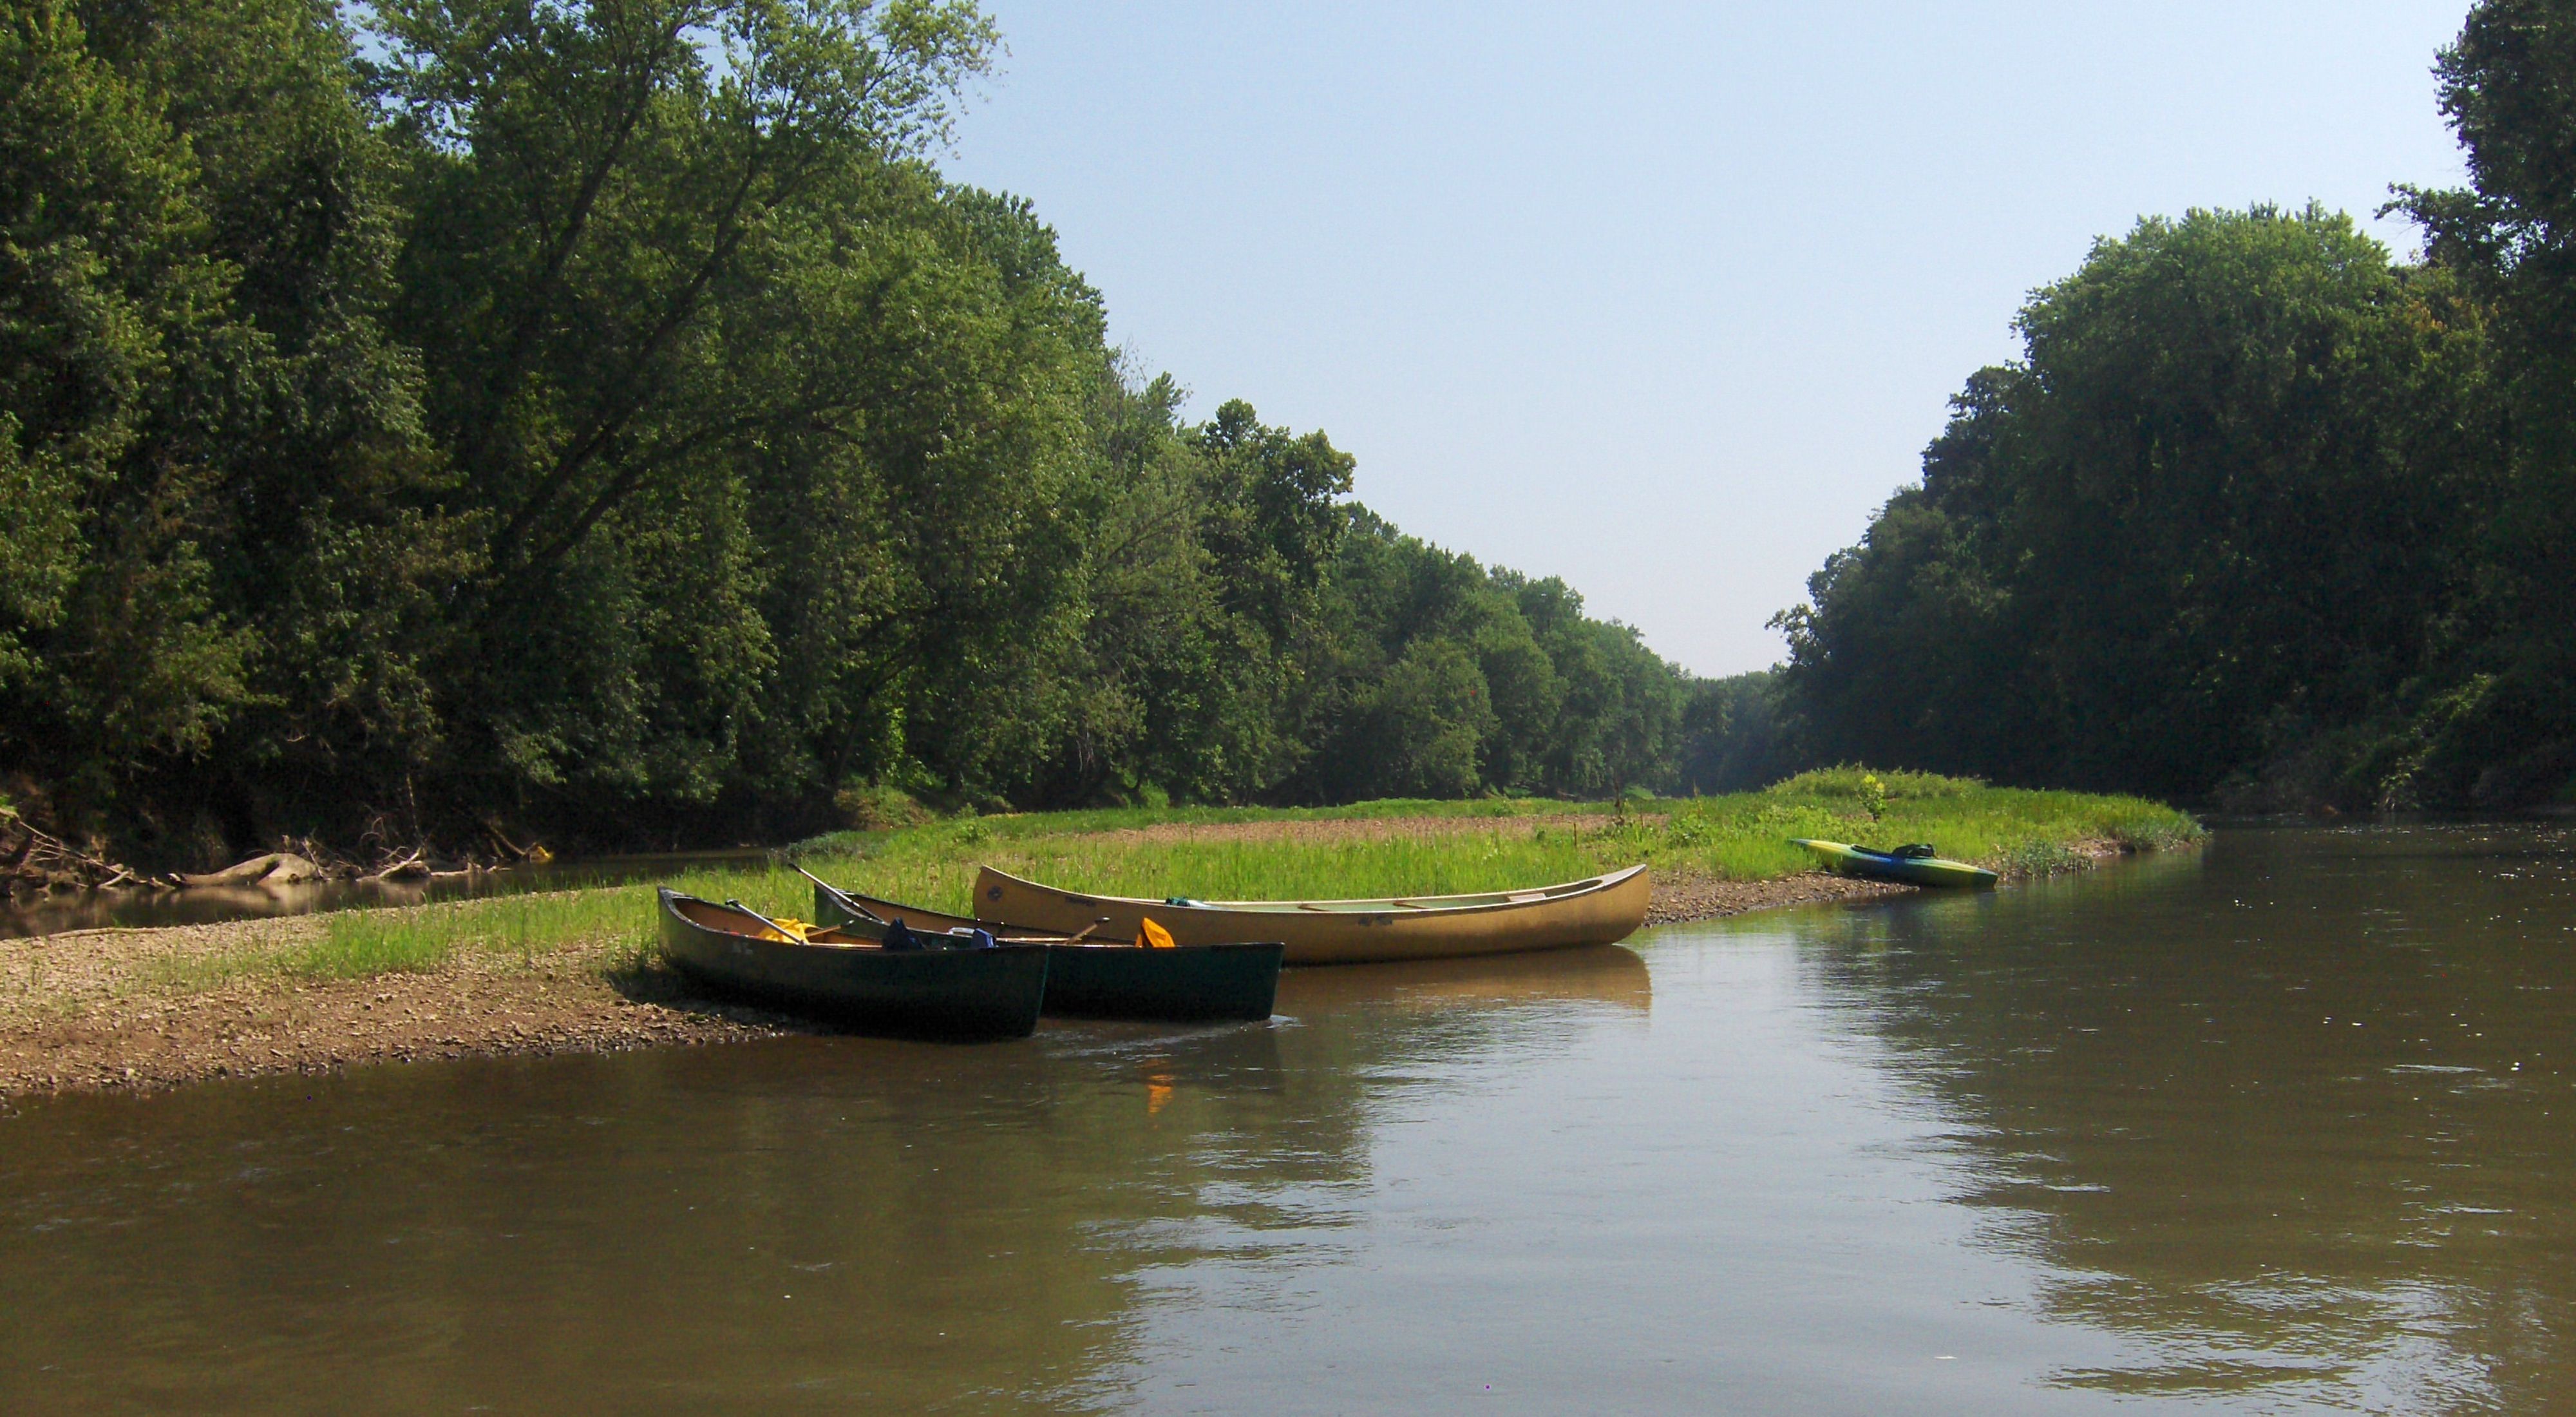 Three canoes and a kayak sit on the side of a river bank.